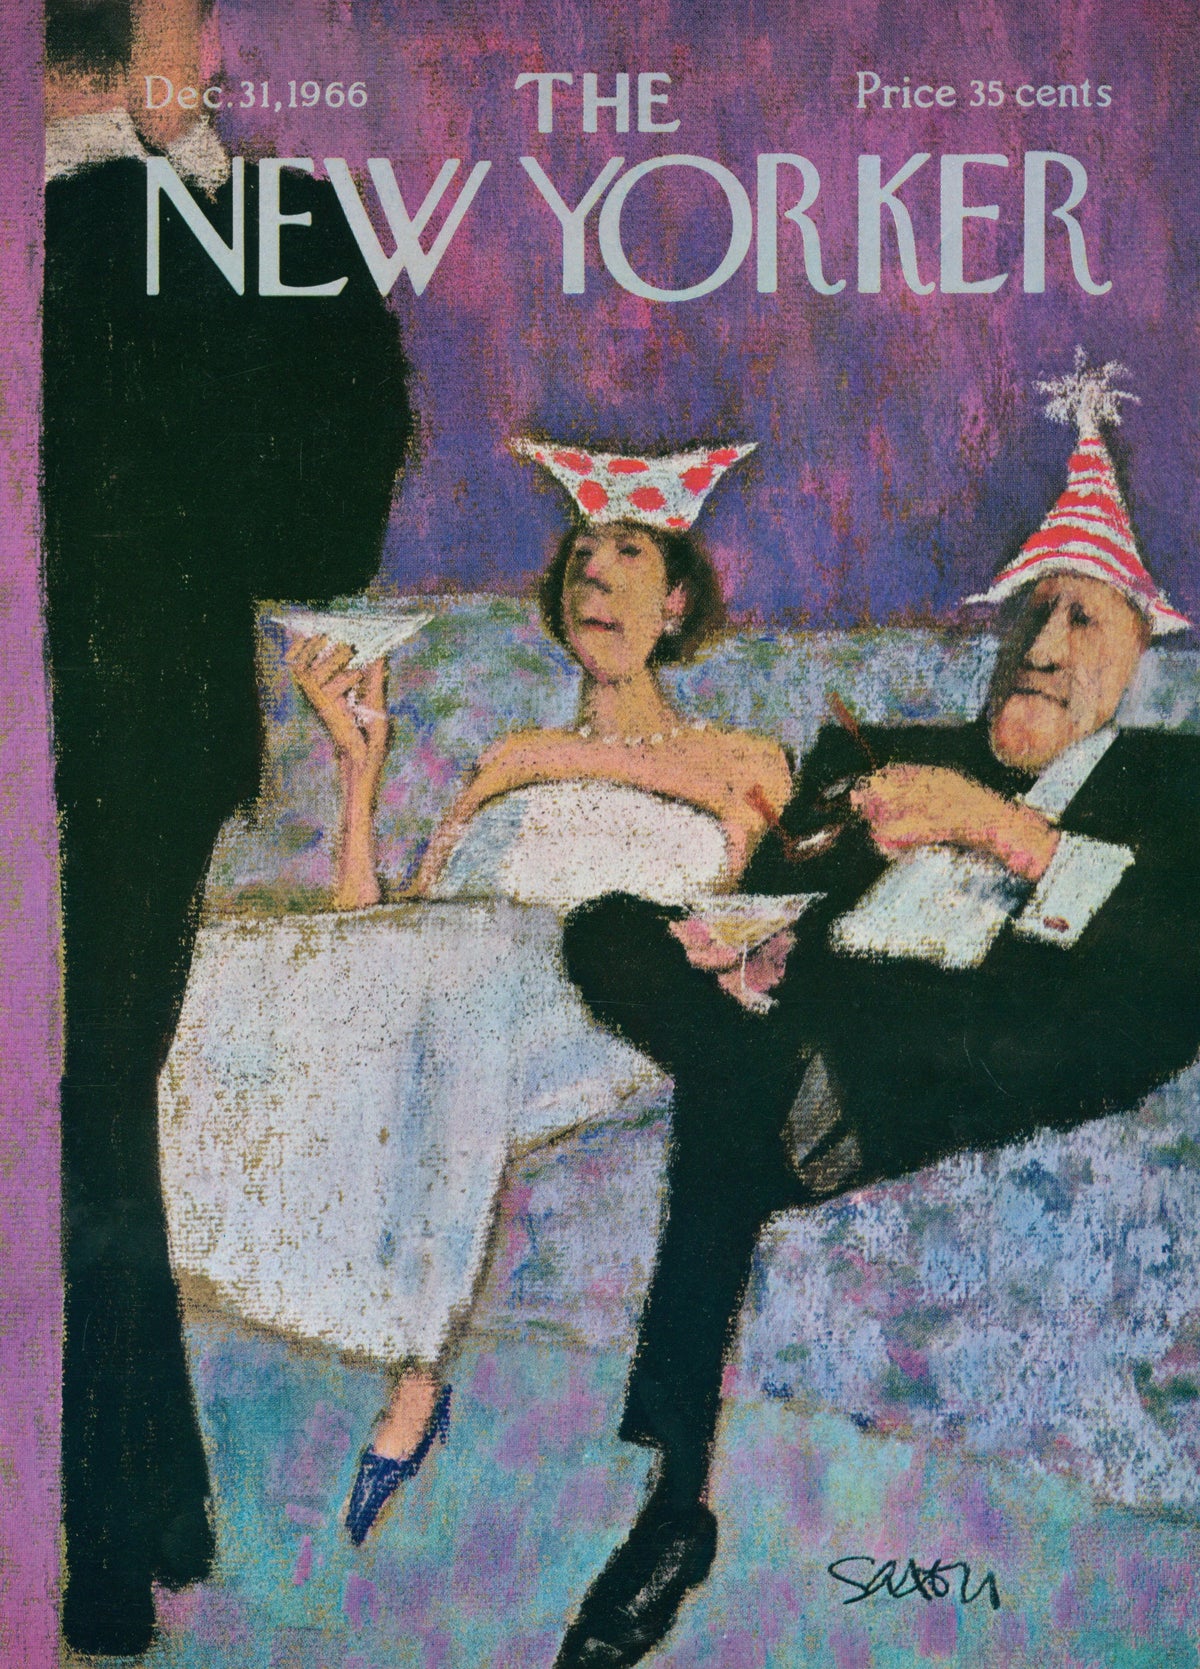 New Years Eve- The New Yorker - Authentic Vintage Antique Print